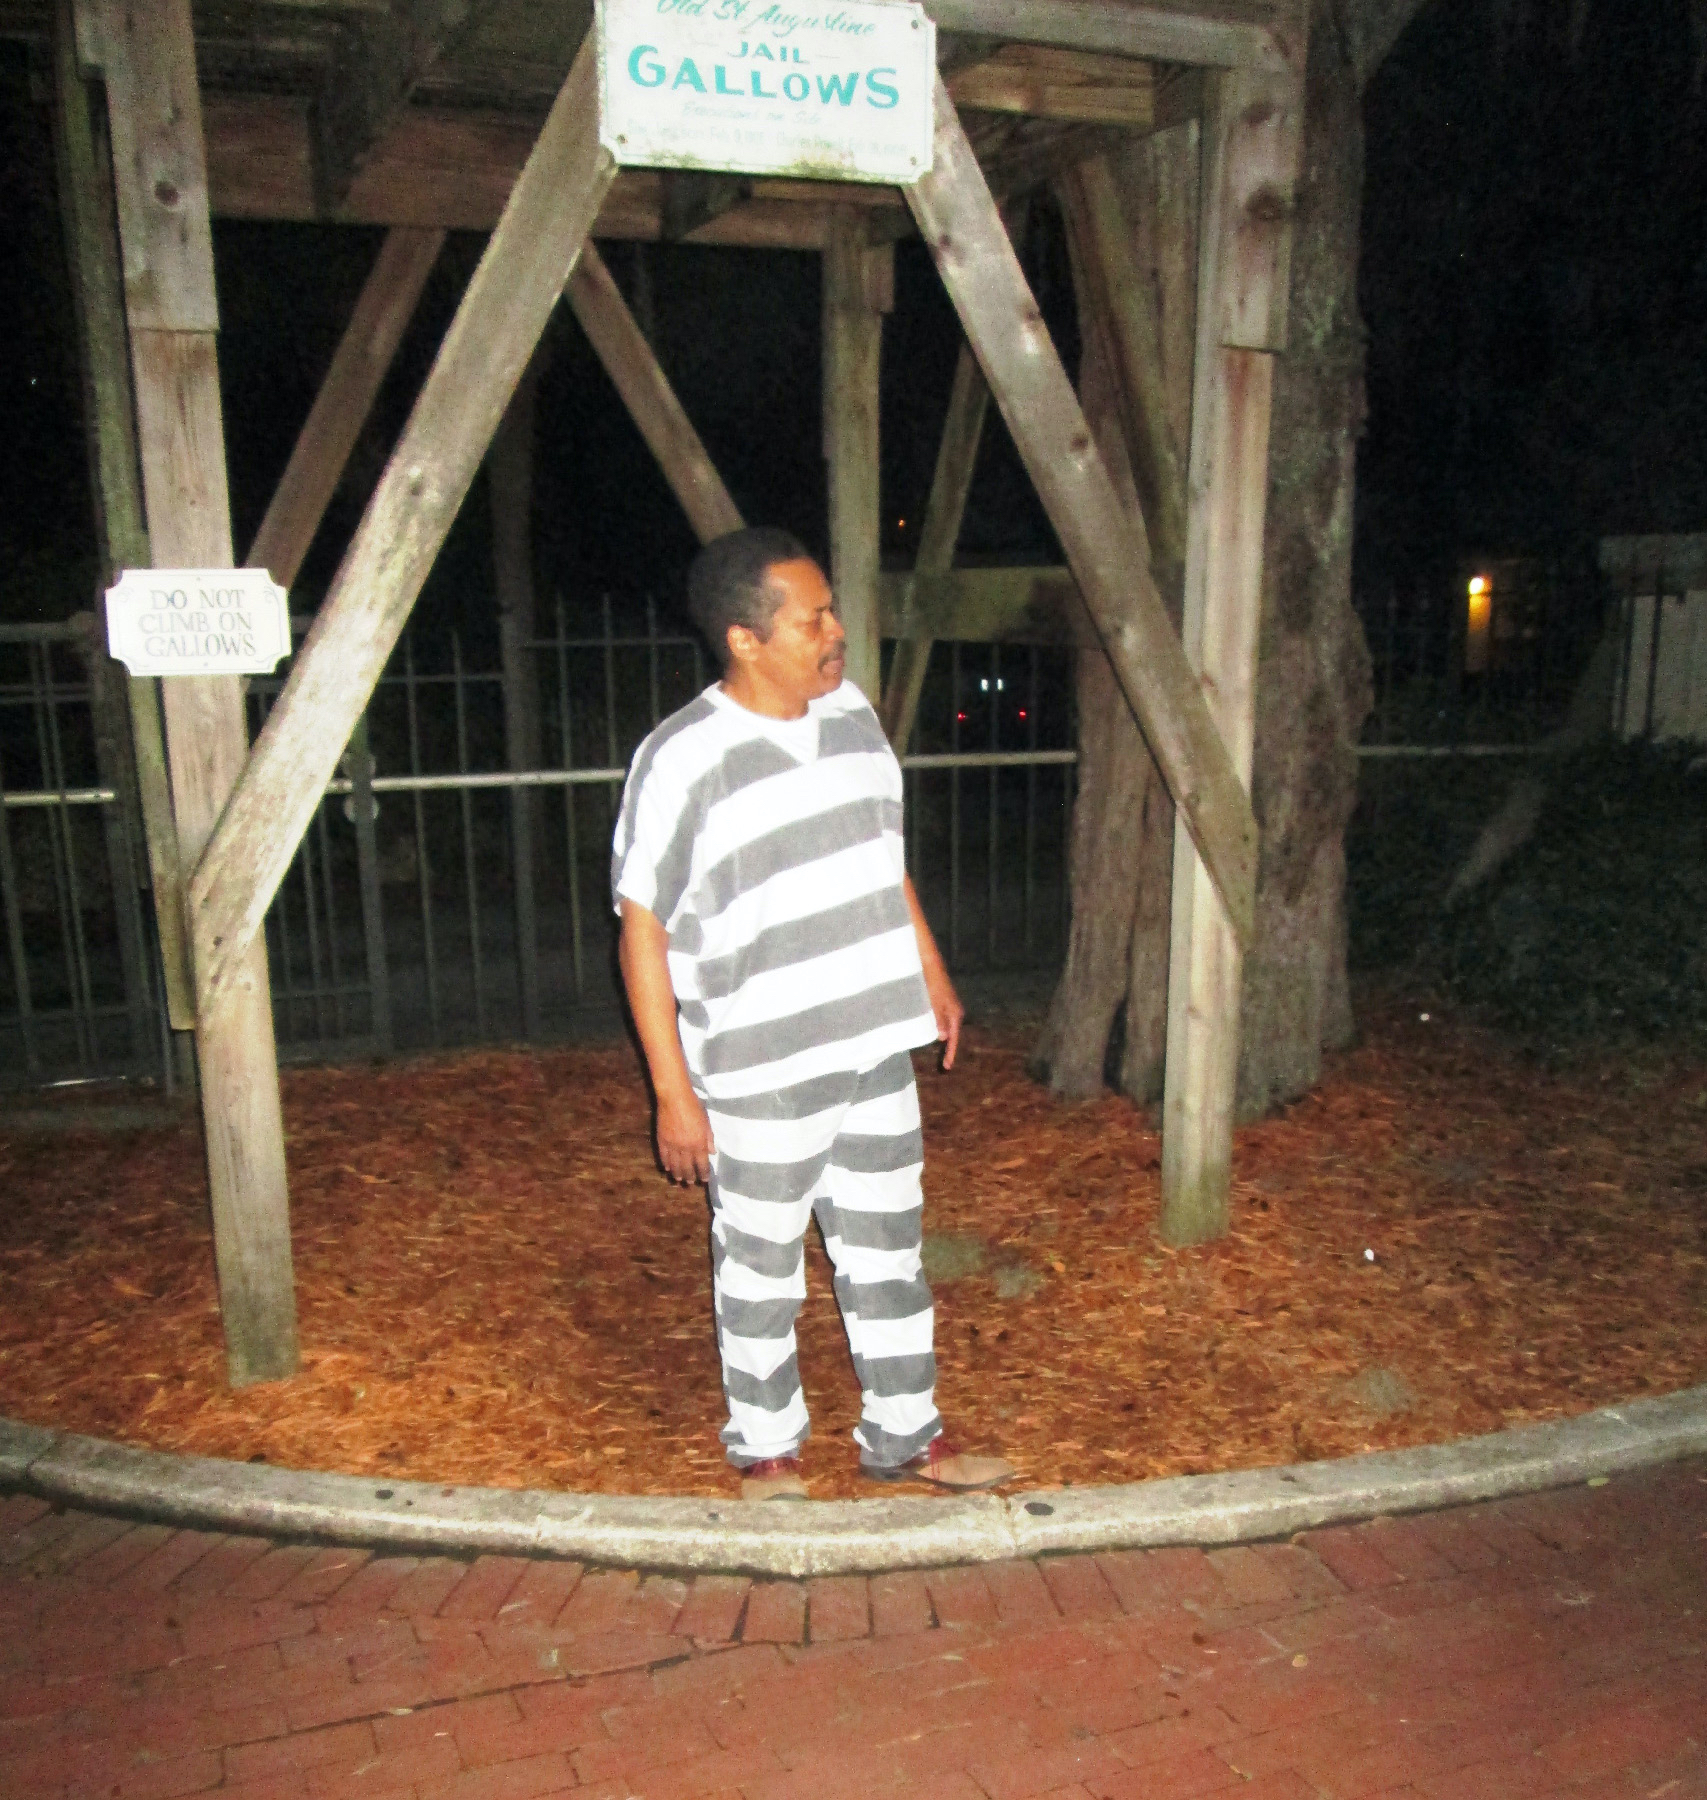 A costumed interpreter at the Hanging Jail in St. Augustine, Florida, tells members of a ghost tour about events that took place there in the past.